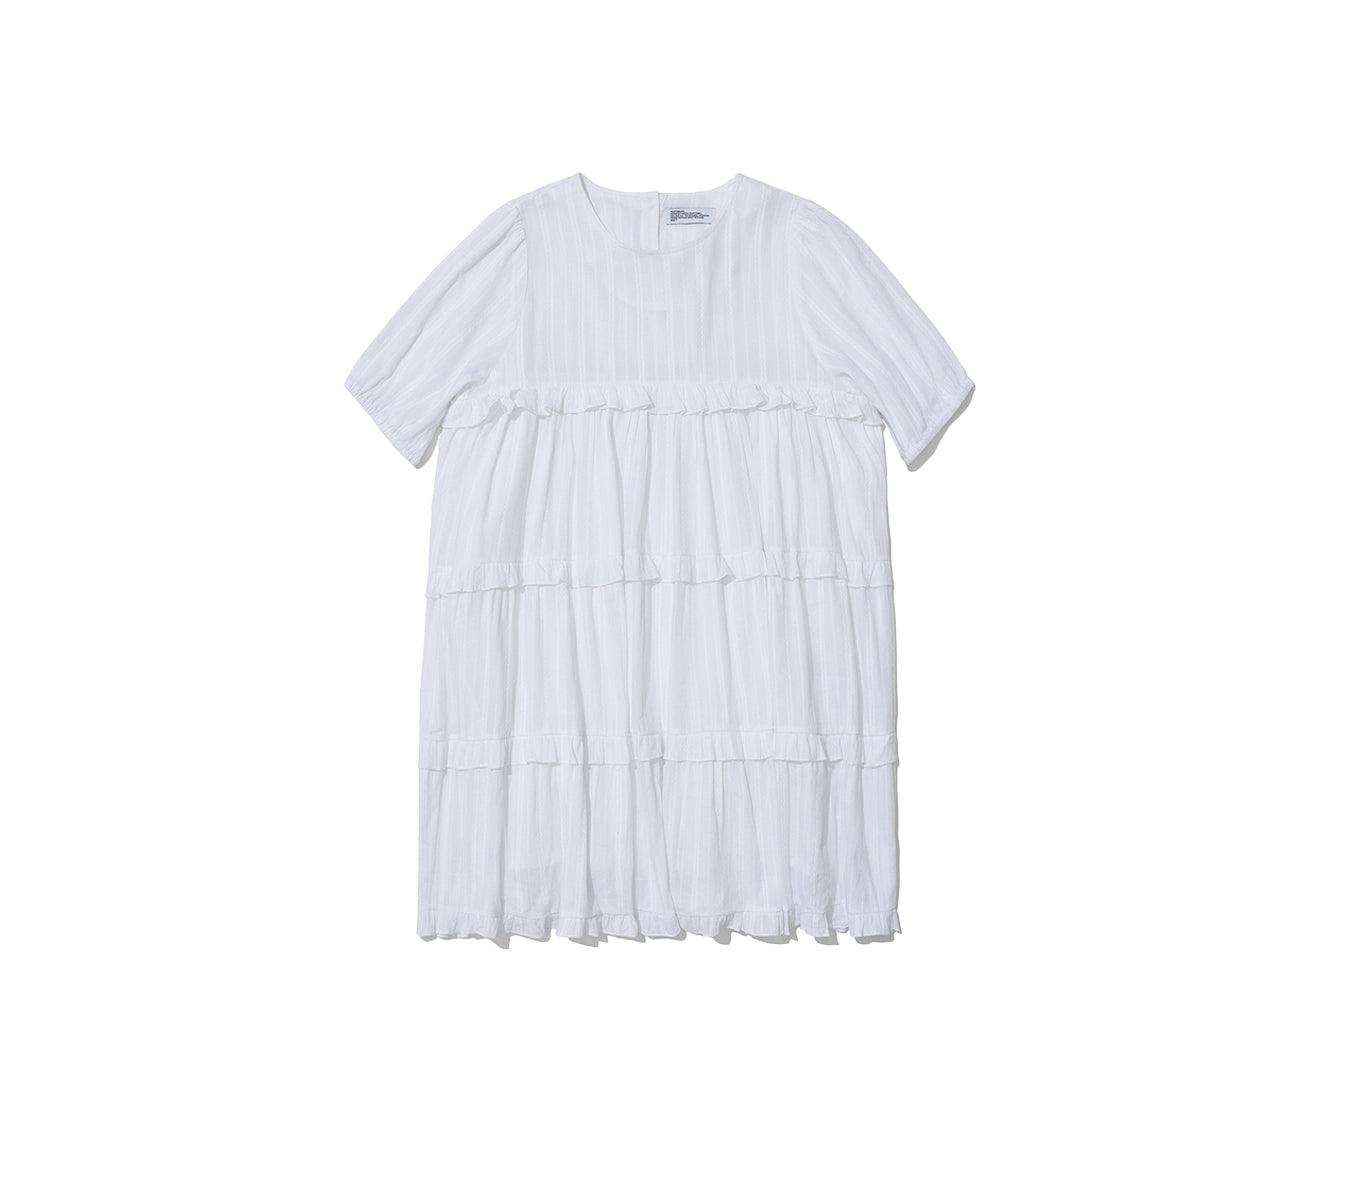 Partimento Frill Can Can Dress - White - One size - Tops